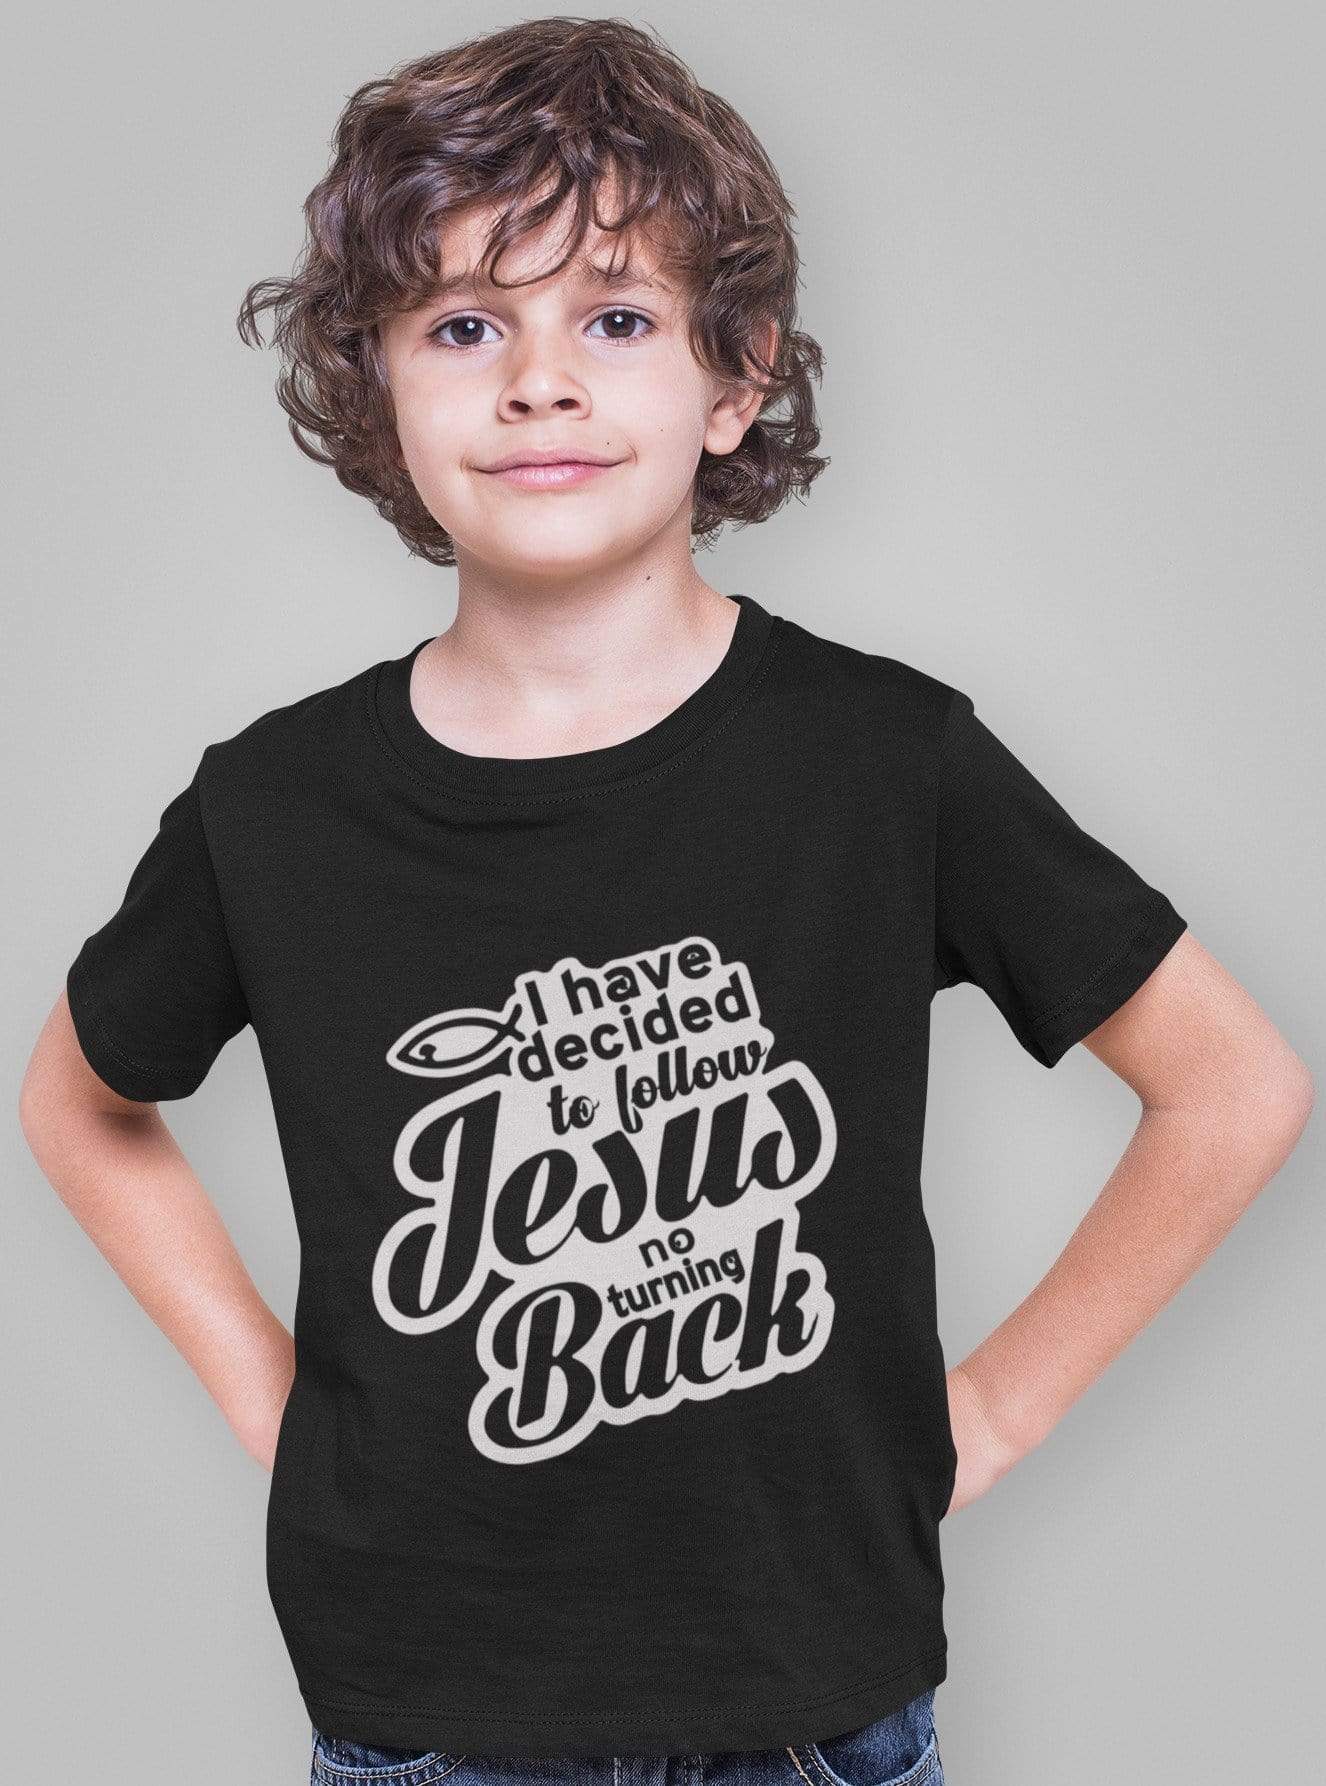 Living Words Kids Round Neck T Shirt Boy / 0-12 Mn / Black I have decided to follow Jesus